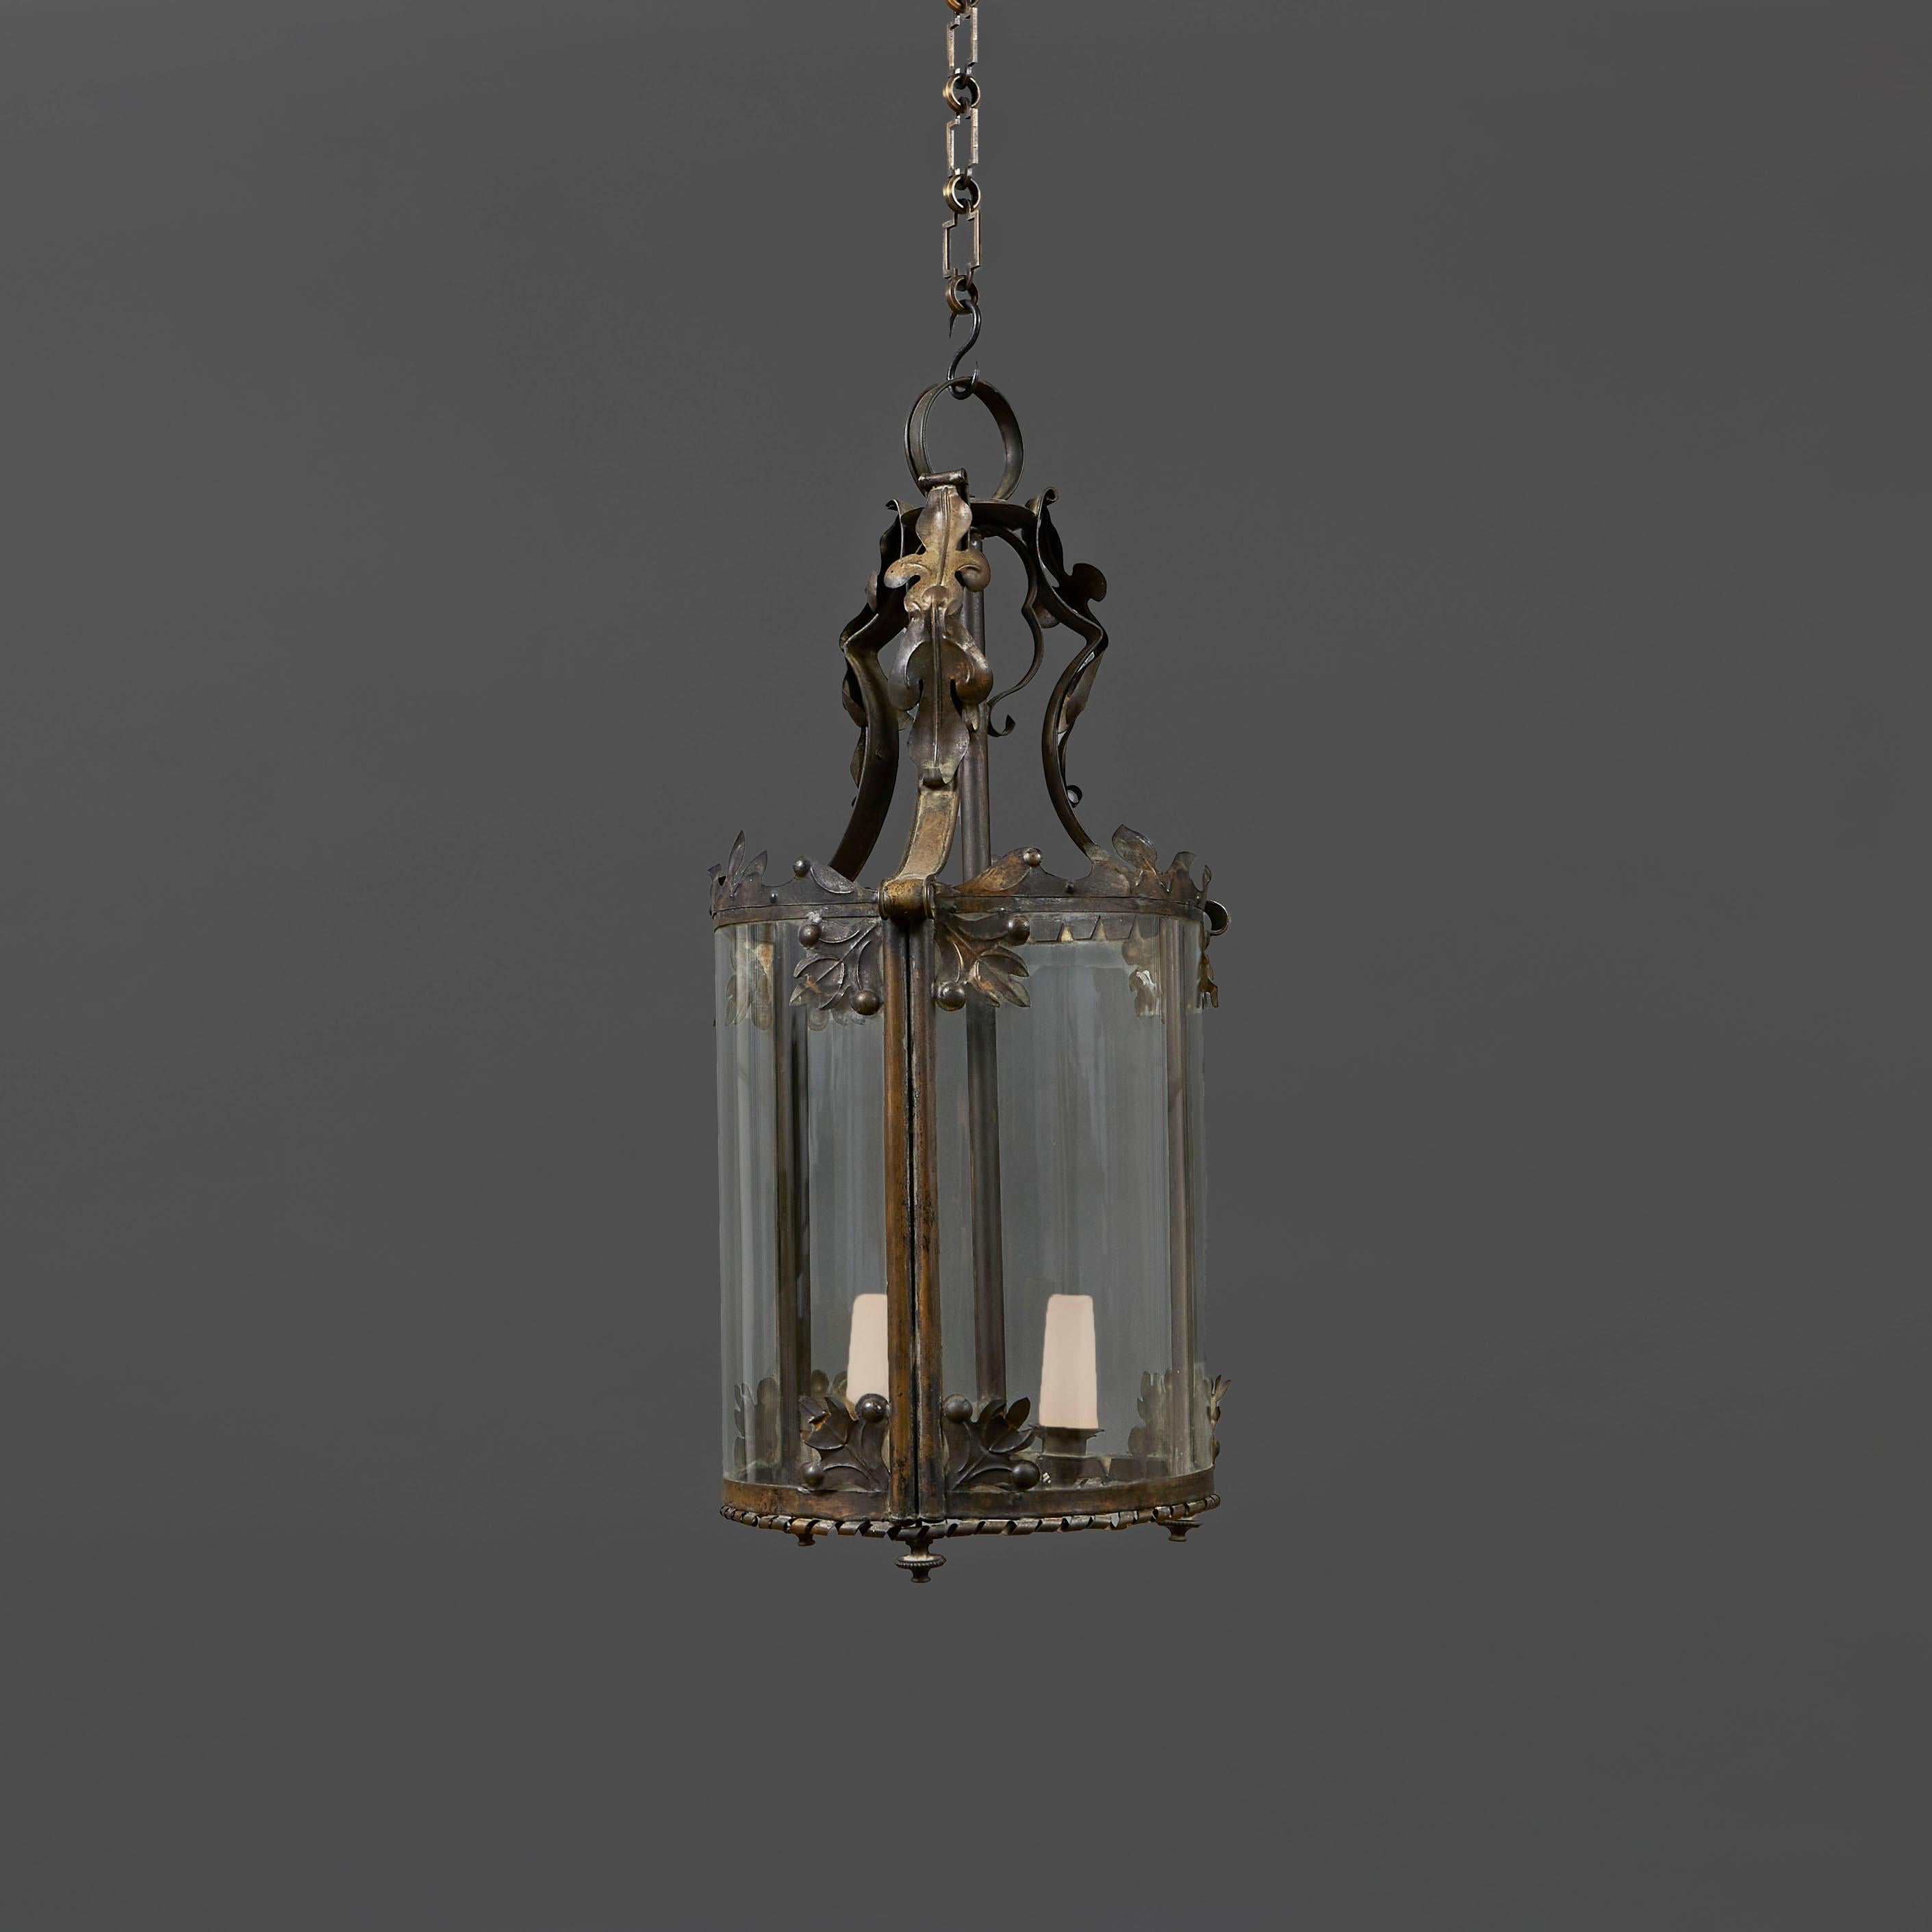 England, circa 1890

A late nineteenth century toleware lantern, with foliate decoration throughout, the scrolling leaves to the top supporting a three candle arm lighting fitting within the curved glass body, the corners of the panels decorated